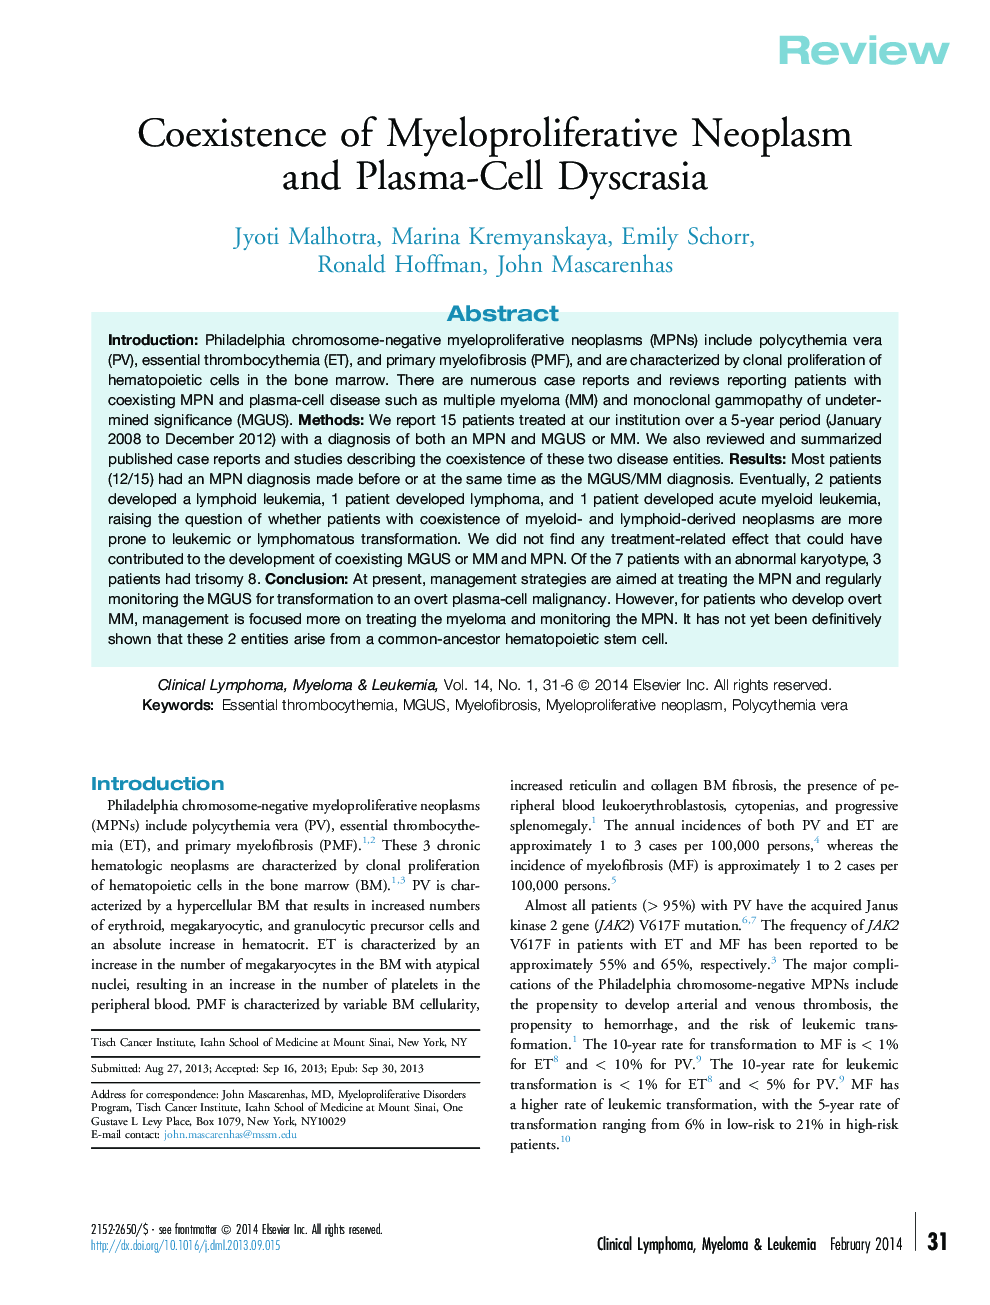 Coexistence of Myeloproliferative Neoplasm and Plasma-Cell Dyscrasia